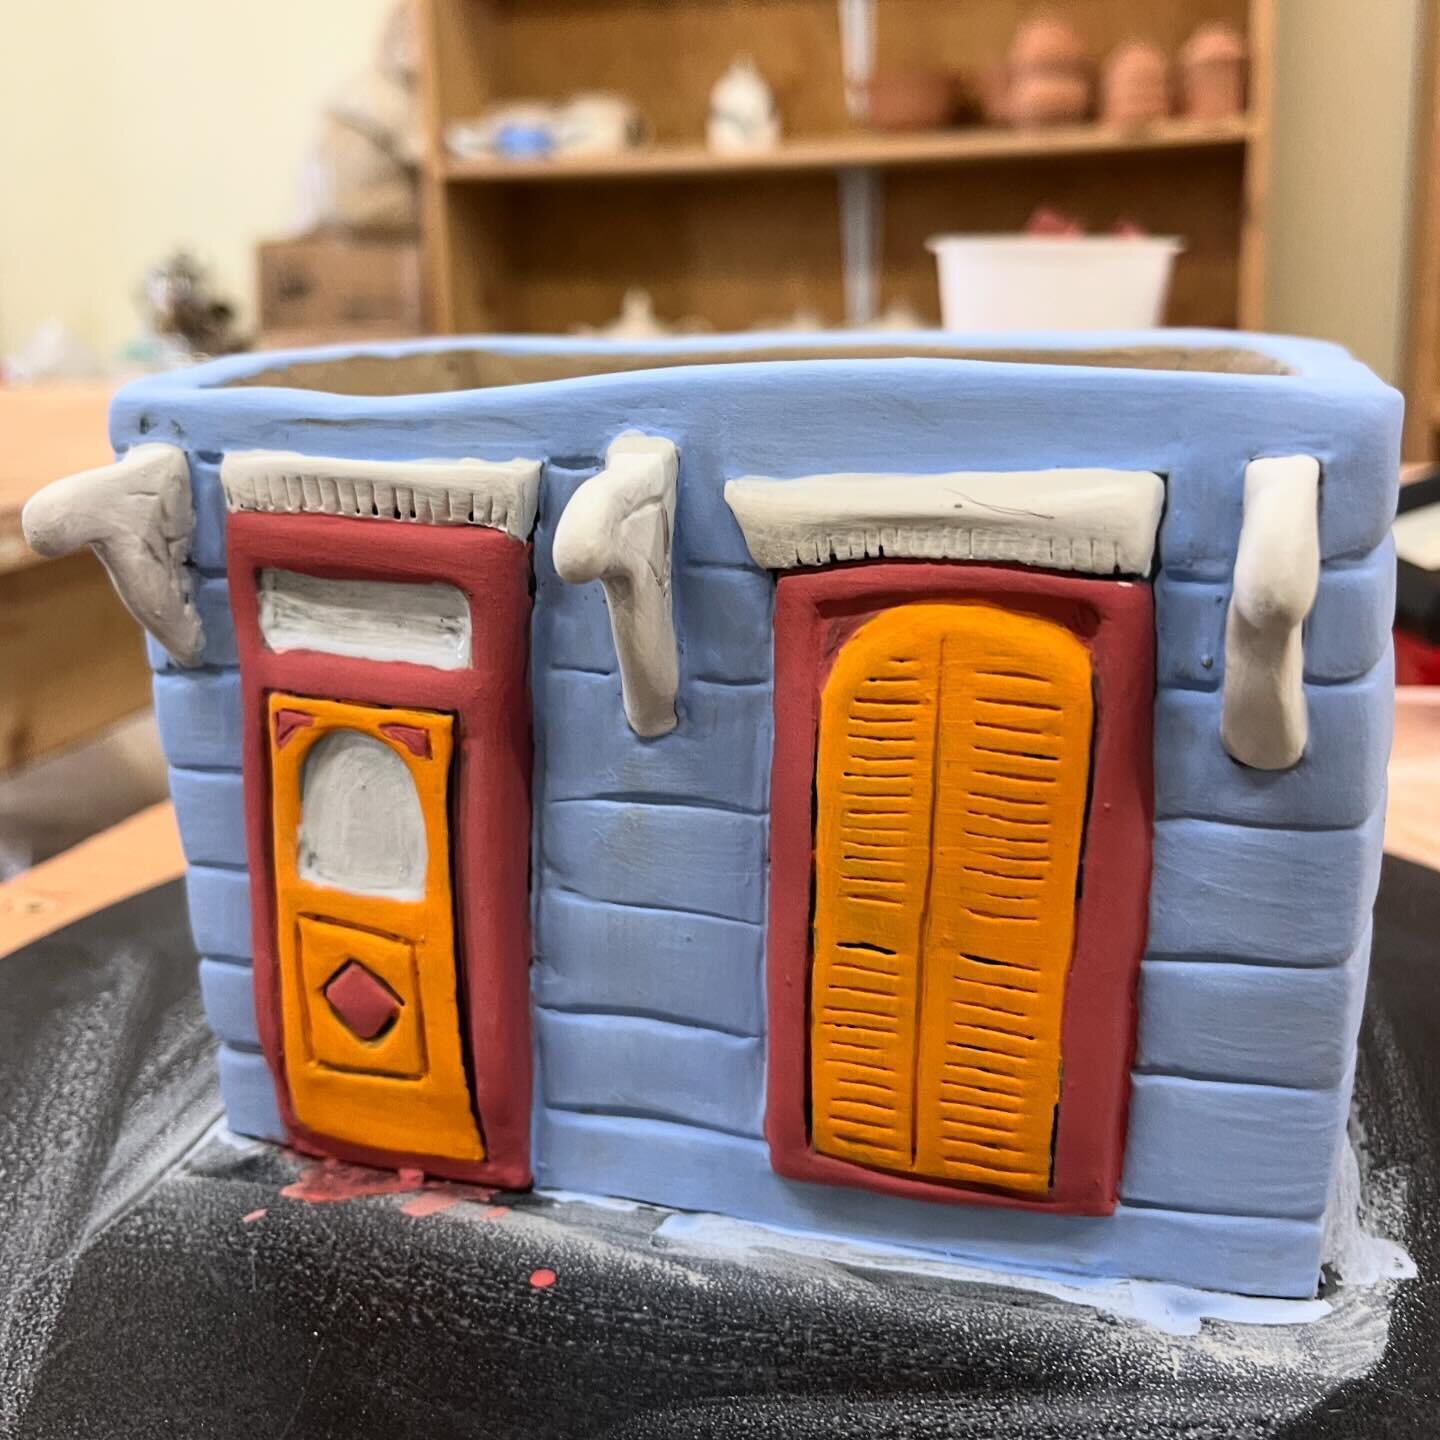 Had a nice &ldquo;welcome home to New Orleans&rdquo; moment in the studio this afternoon when a second line passed by as I was working on this little house jar. I feel so lucky and grateful to have attended my first NCECA and I think it will be keepi